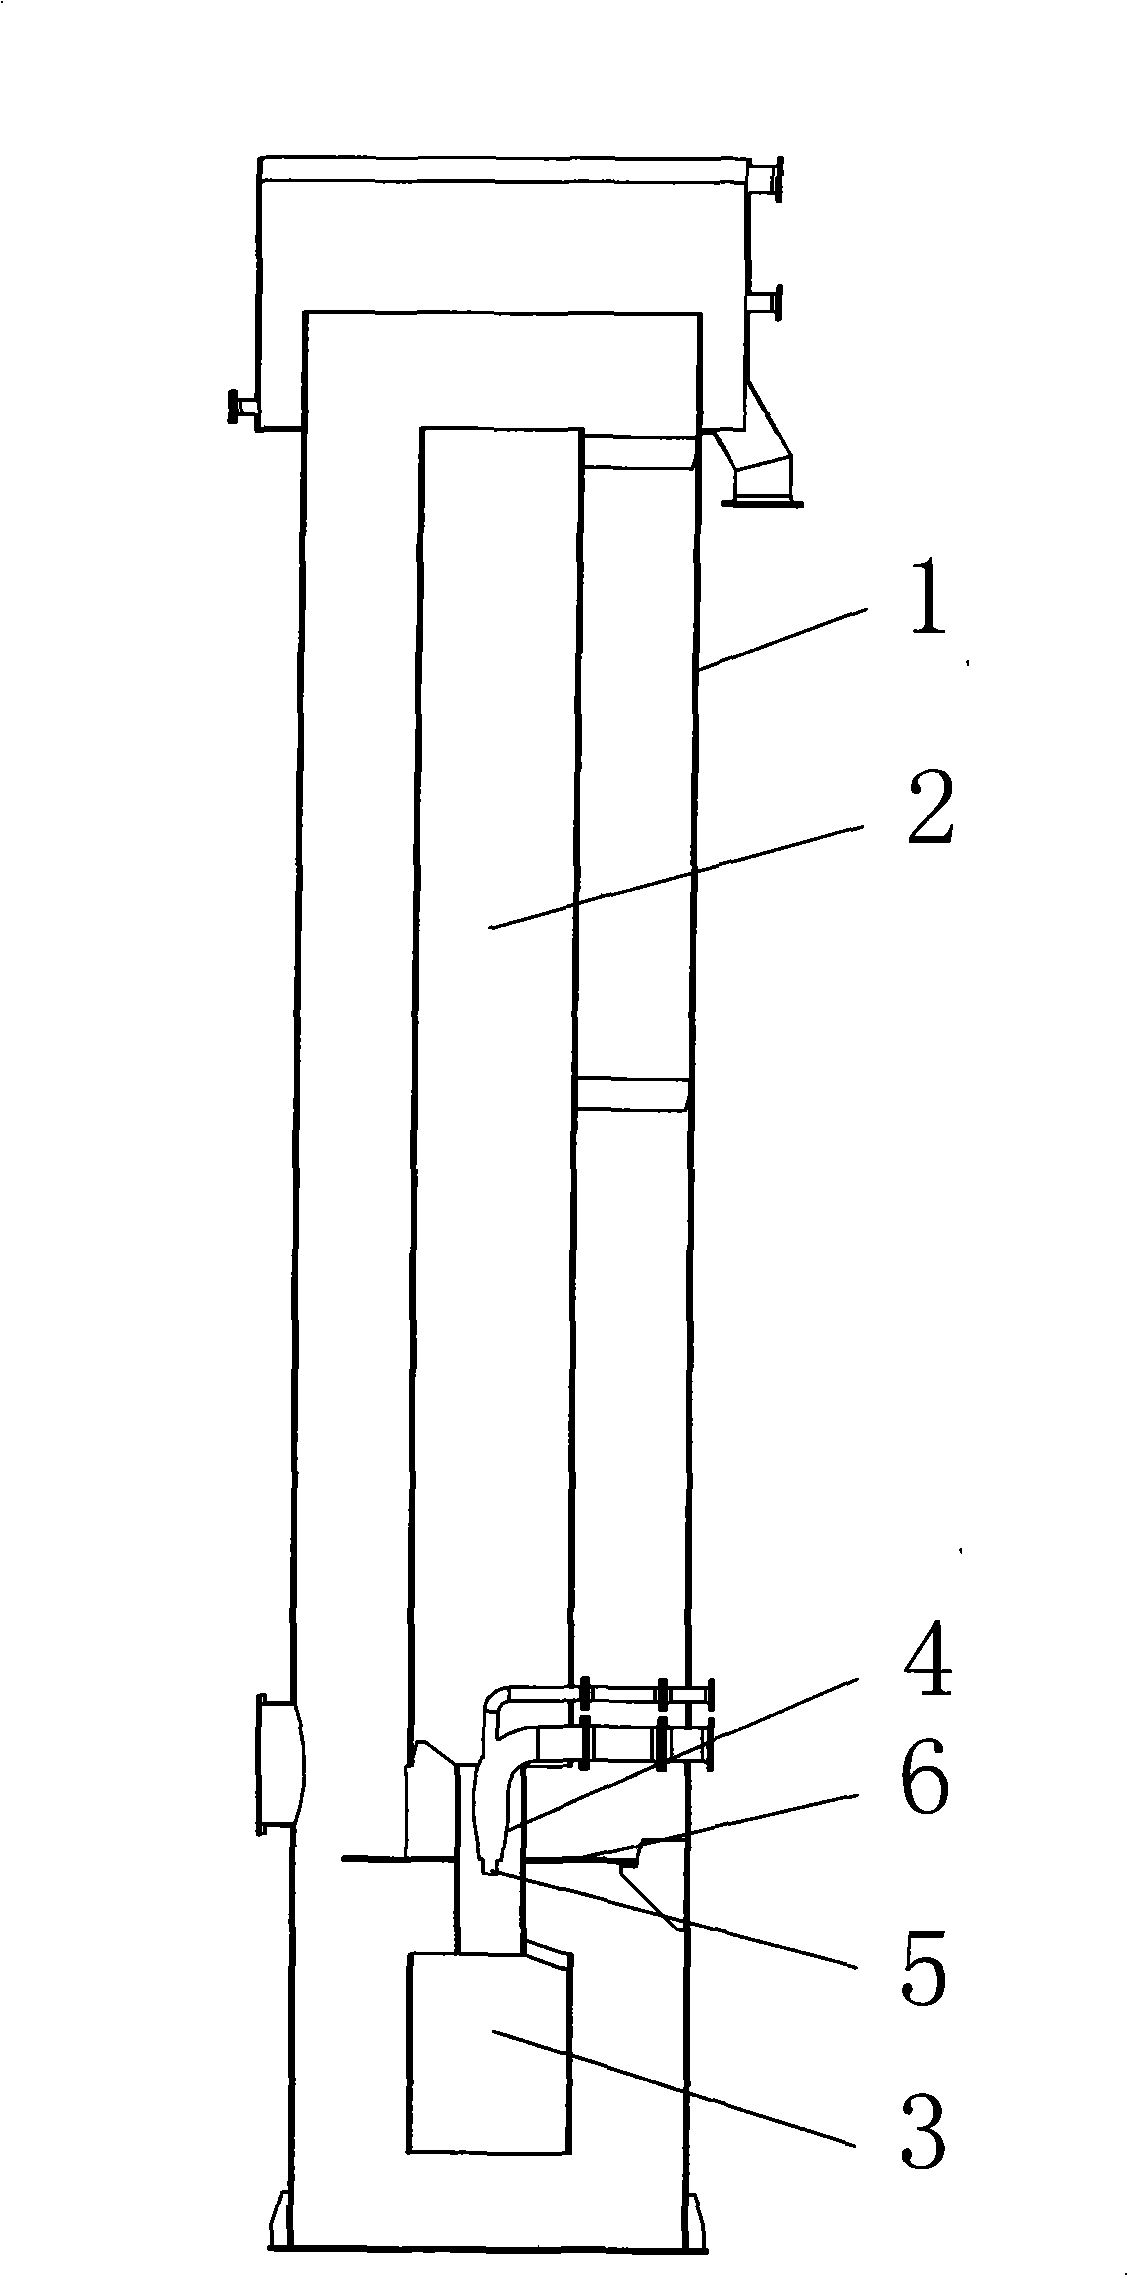 Method of processing high concentration organic wastewater